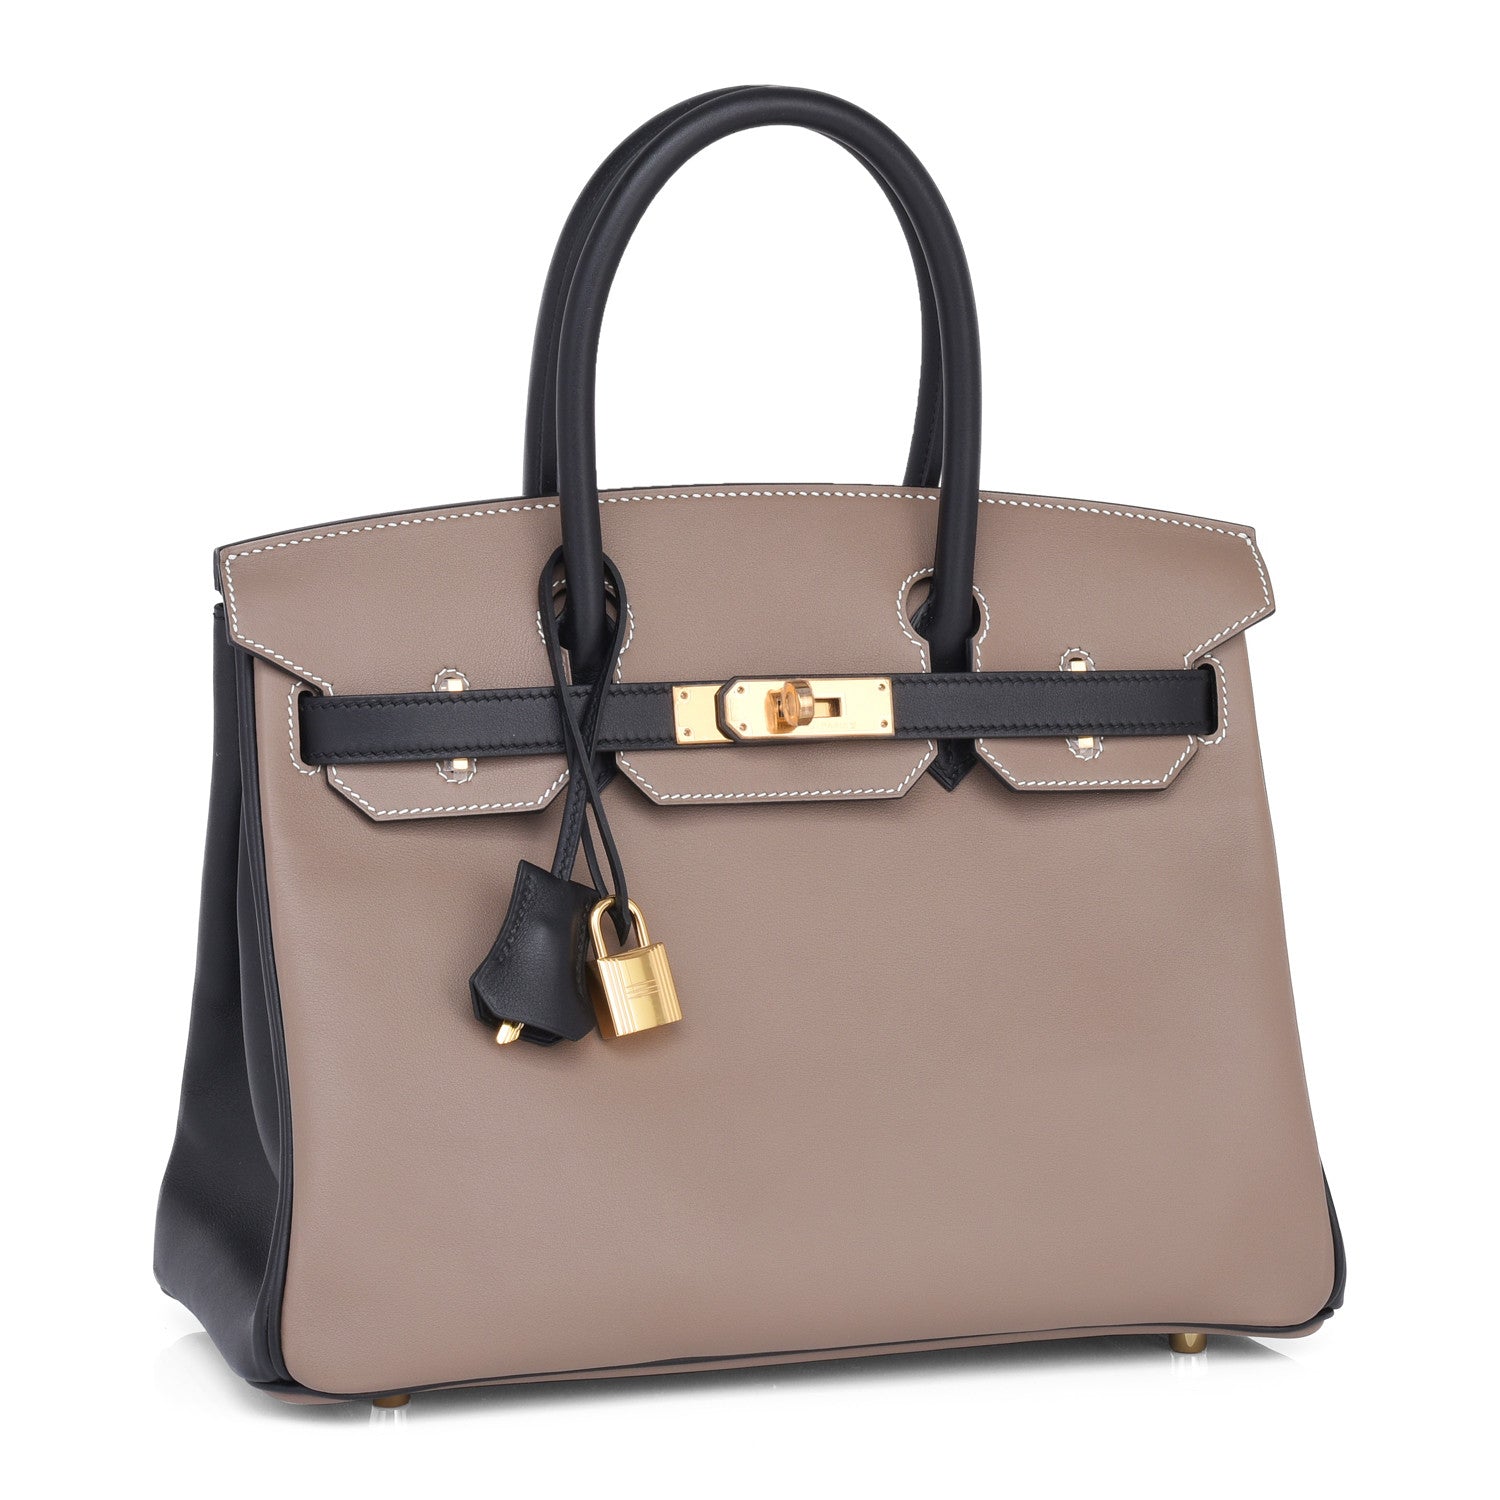 Birkin 30 contrast color, GHW, 100% handmade. Etoupe grey with trench color  togo leather.